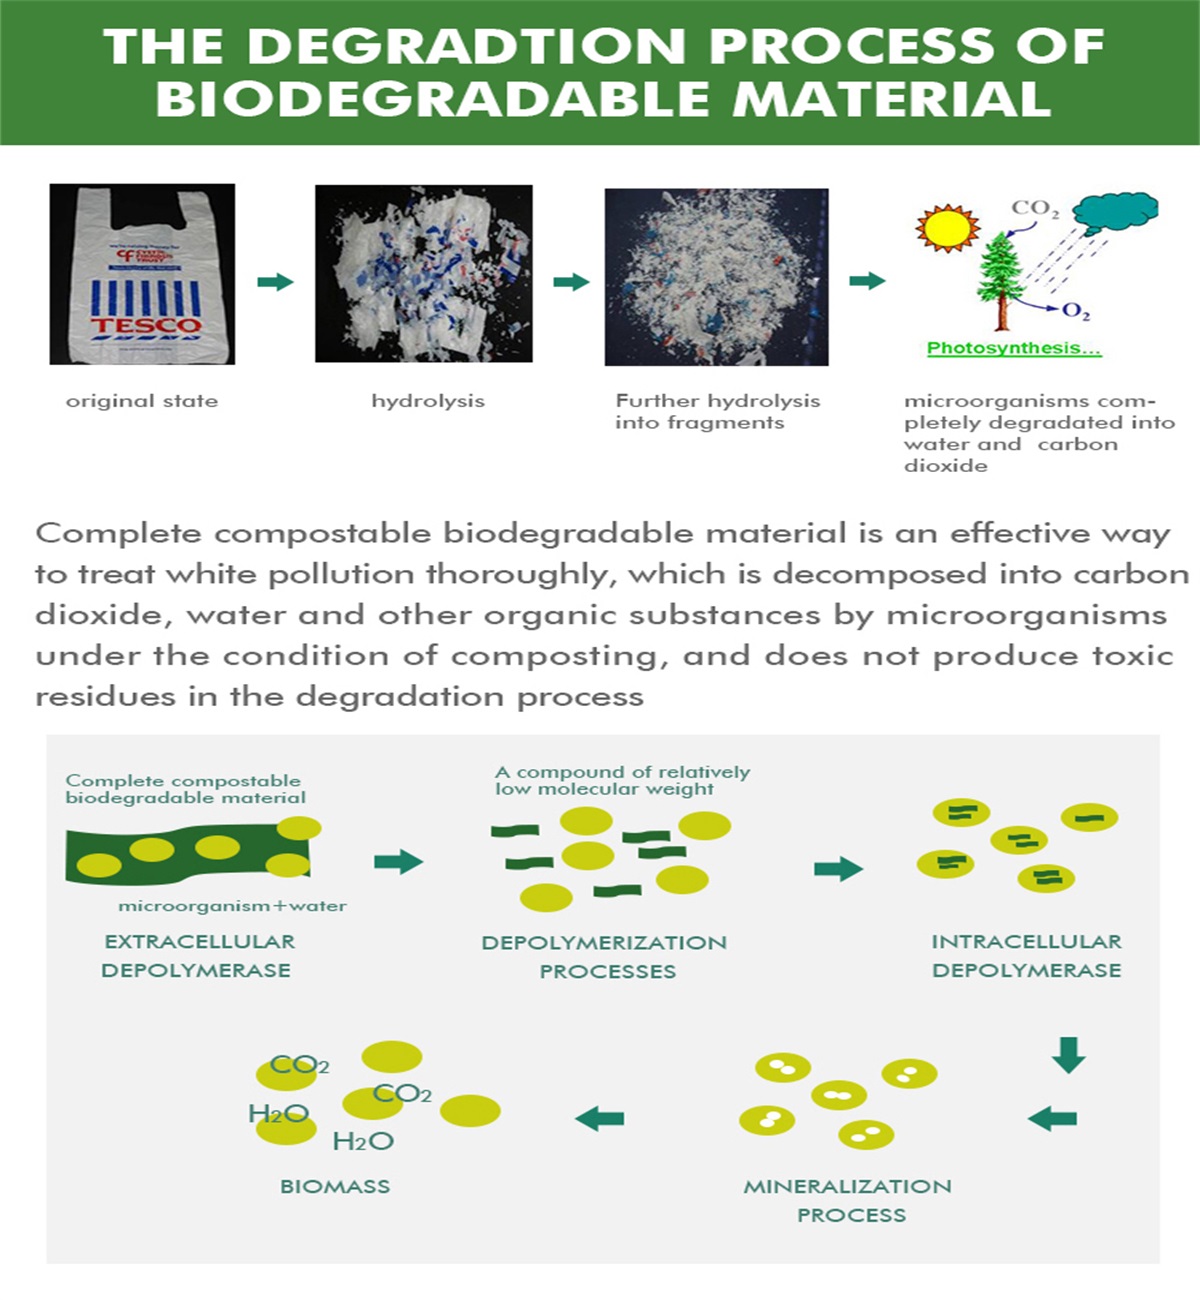 The Process of Biodegradable Material